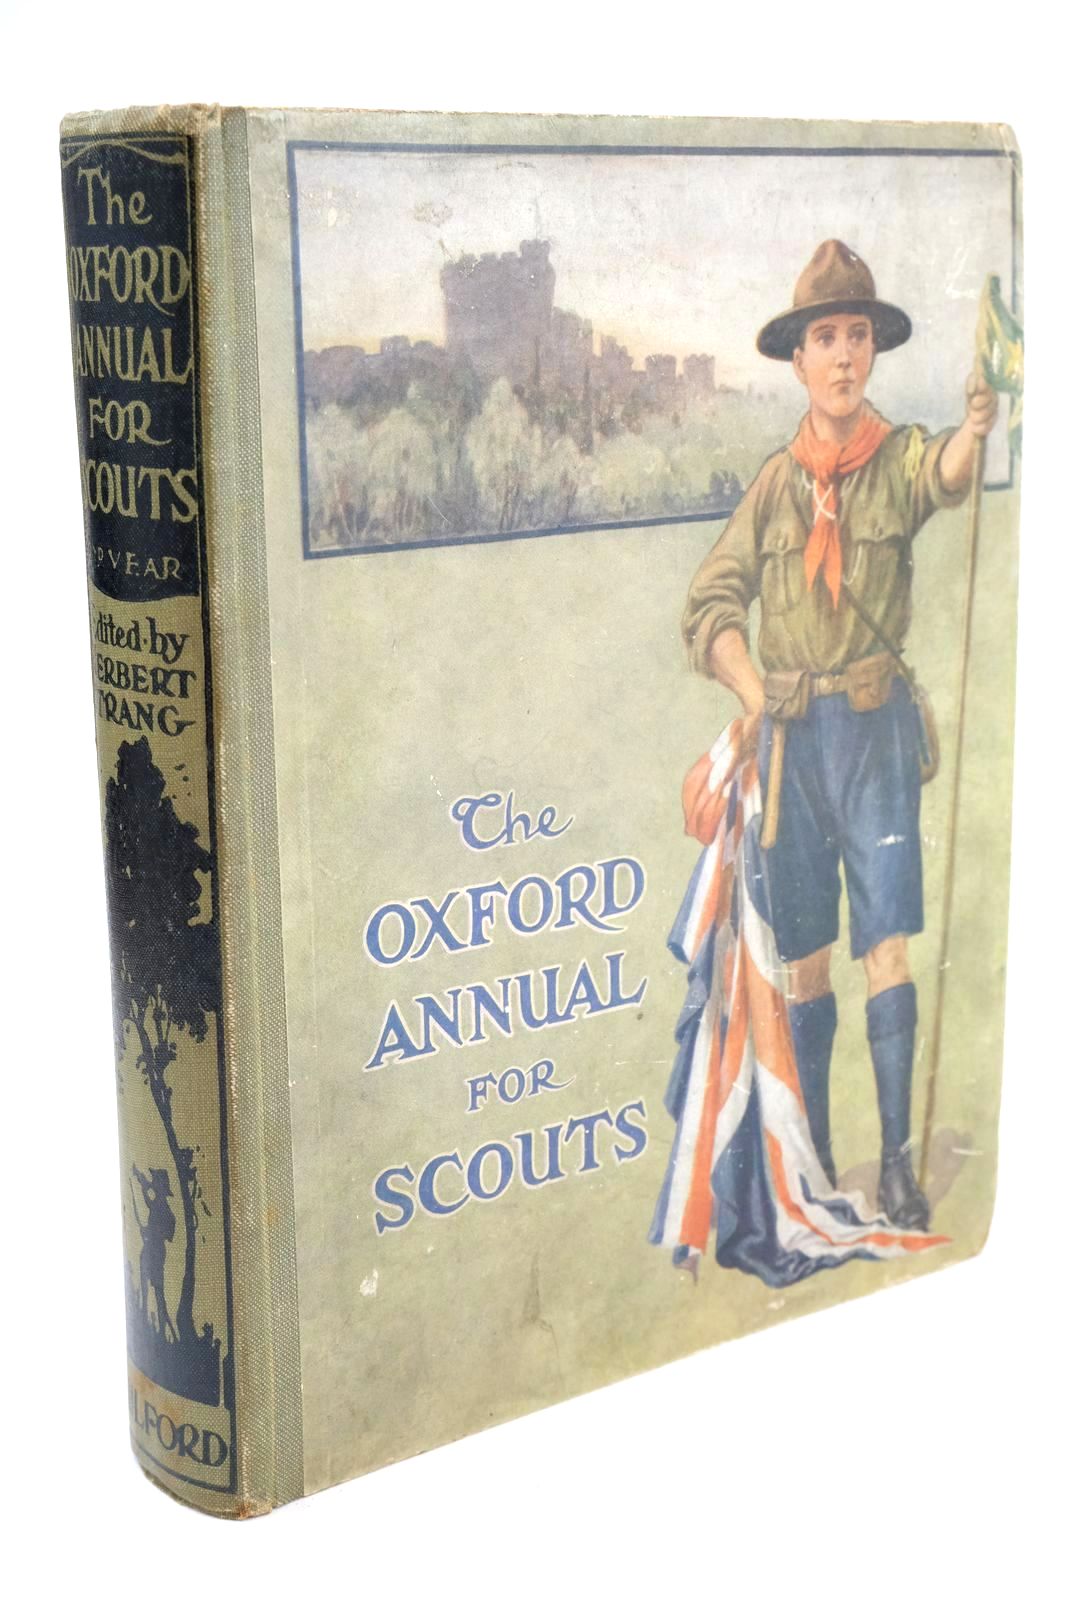 Photo of THE OXFORD ANNUAL FOR SCOUTS 2ND YEAR written by Strang, Herbert Martin, John Westell, W. Percival Avery, Harold et al, illustrated by Lumley, Savile Pitcher, N. Sotheby Brock, H.M. et al., published by Oxford University Press, Humphrey Milford (STOCK CODE: 1324762)  for sale by Stella & Rose's Books